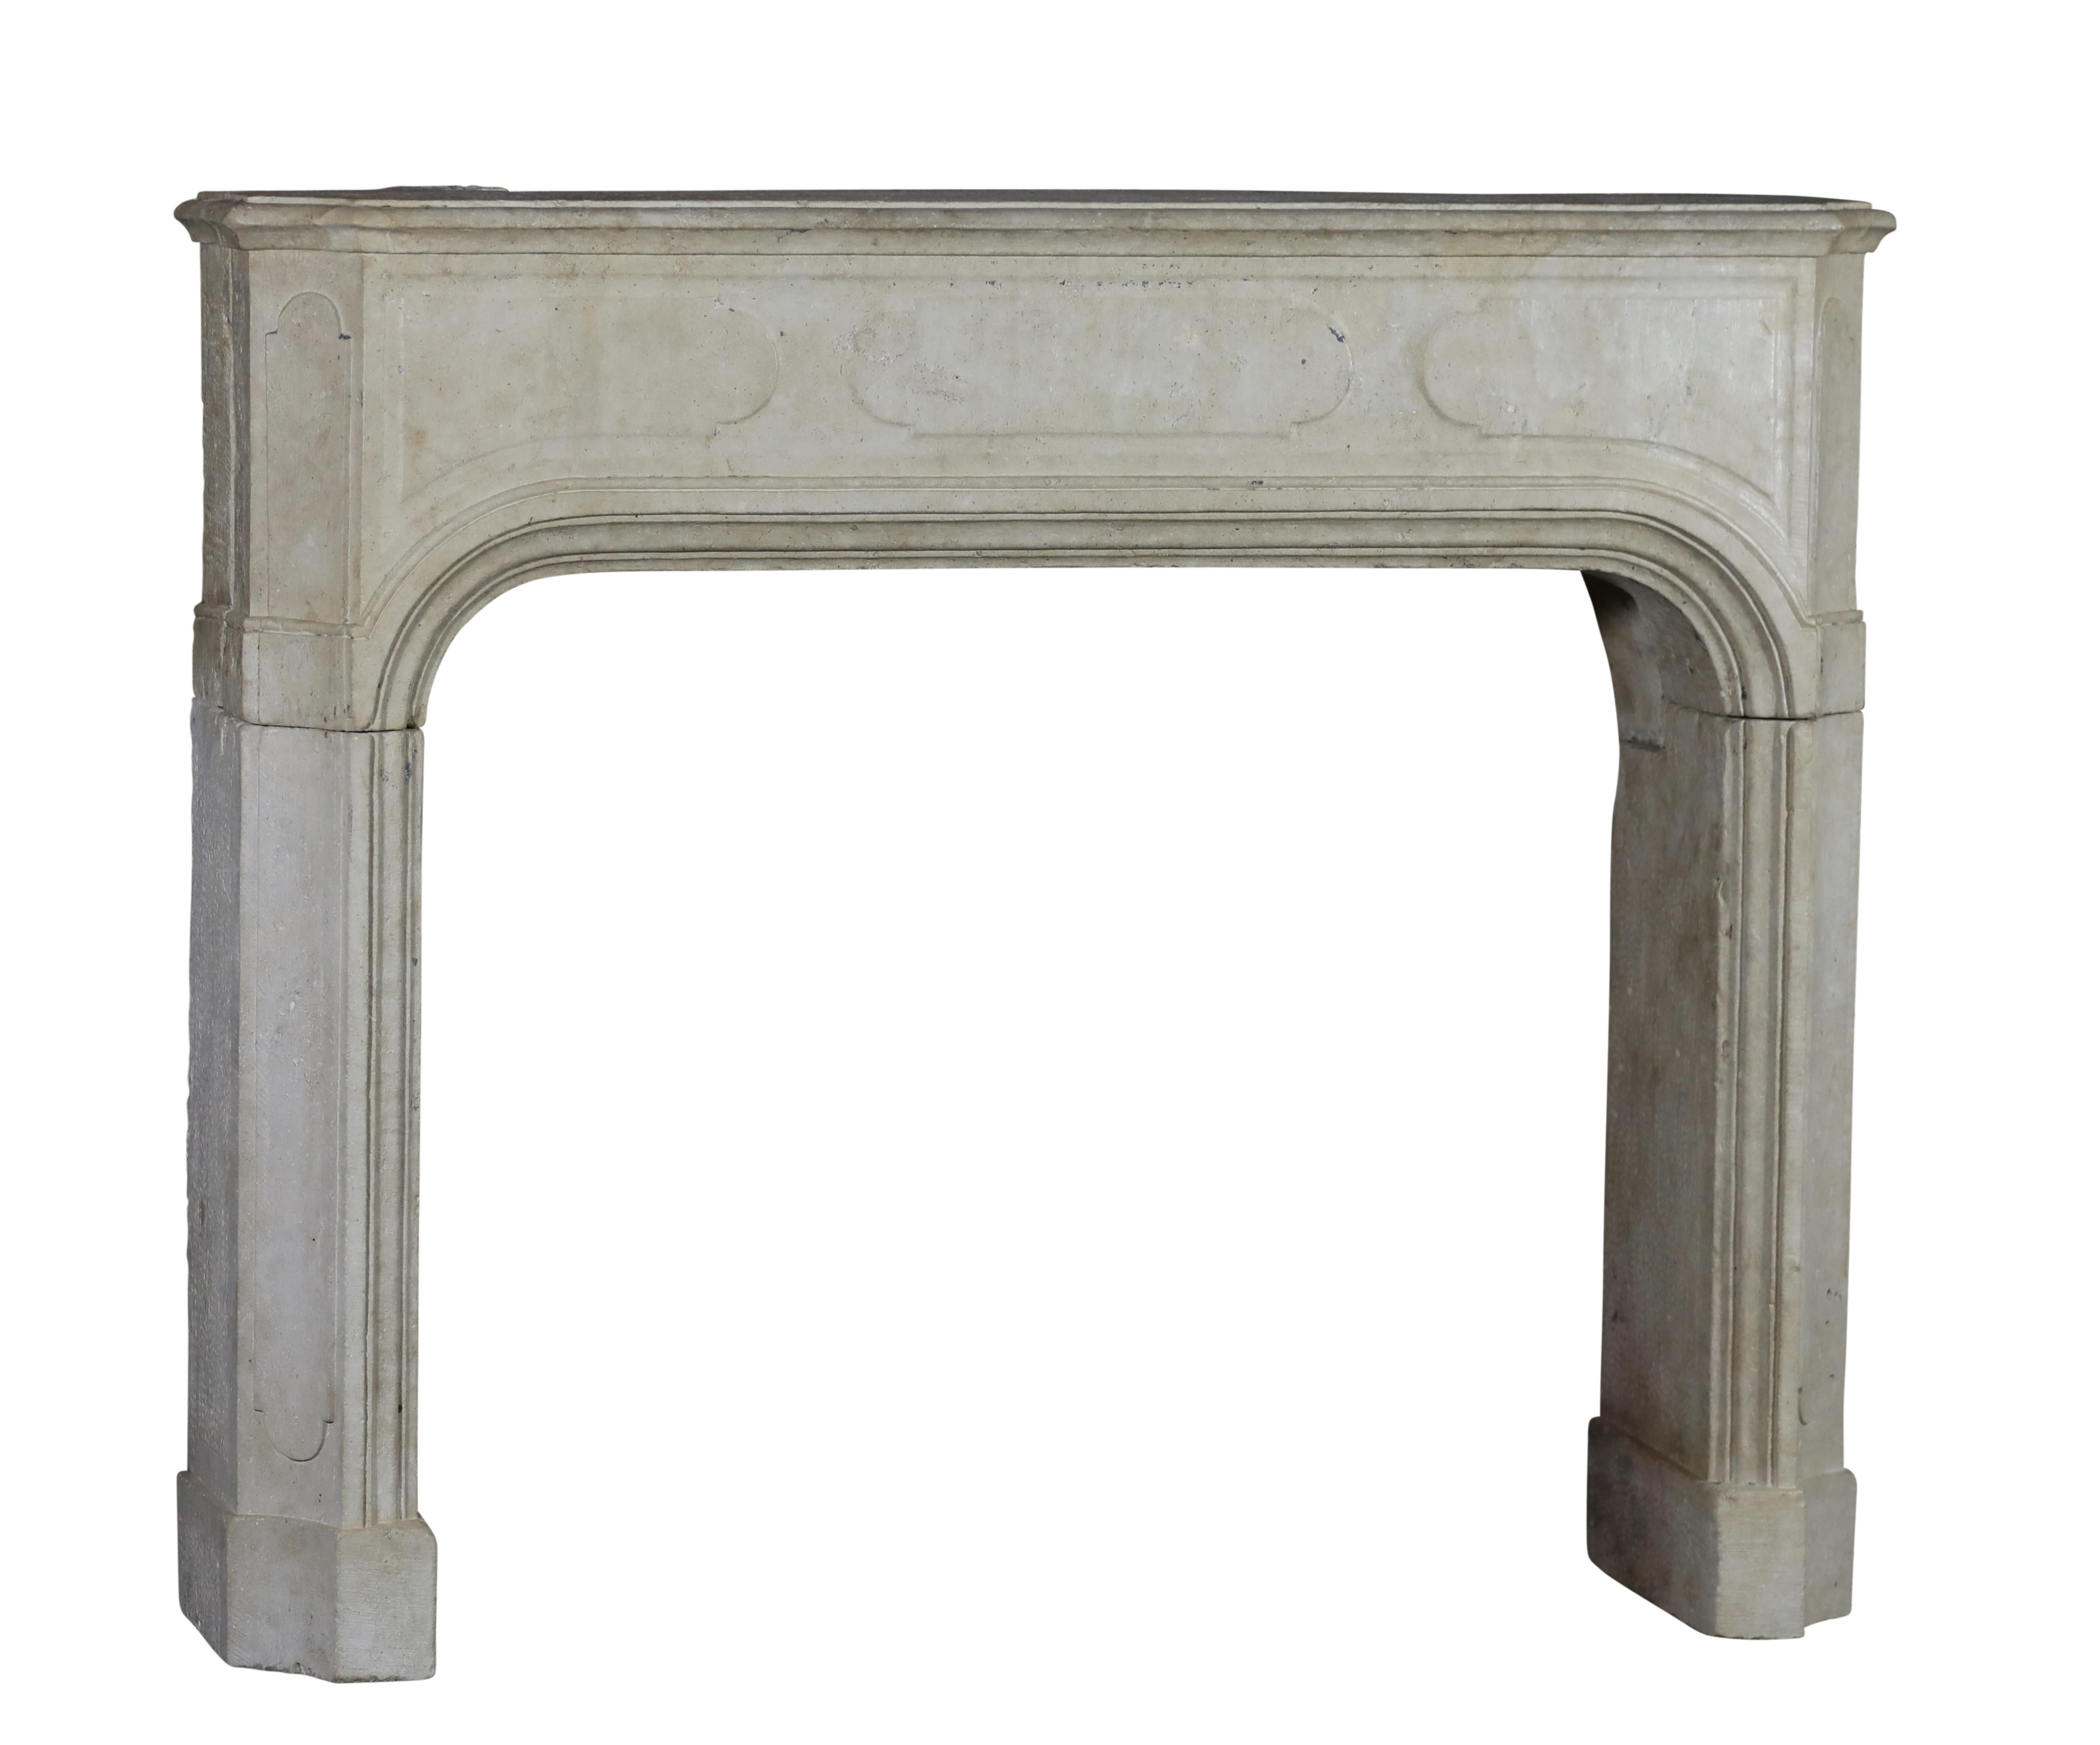 French 18th Century City Palace Fireplace Mantle With Original Grand Wear  For Sale